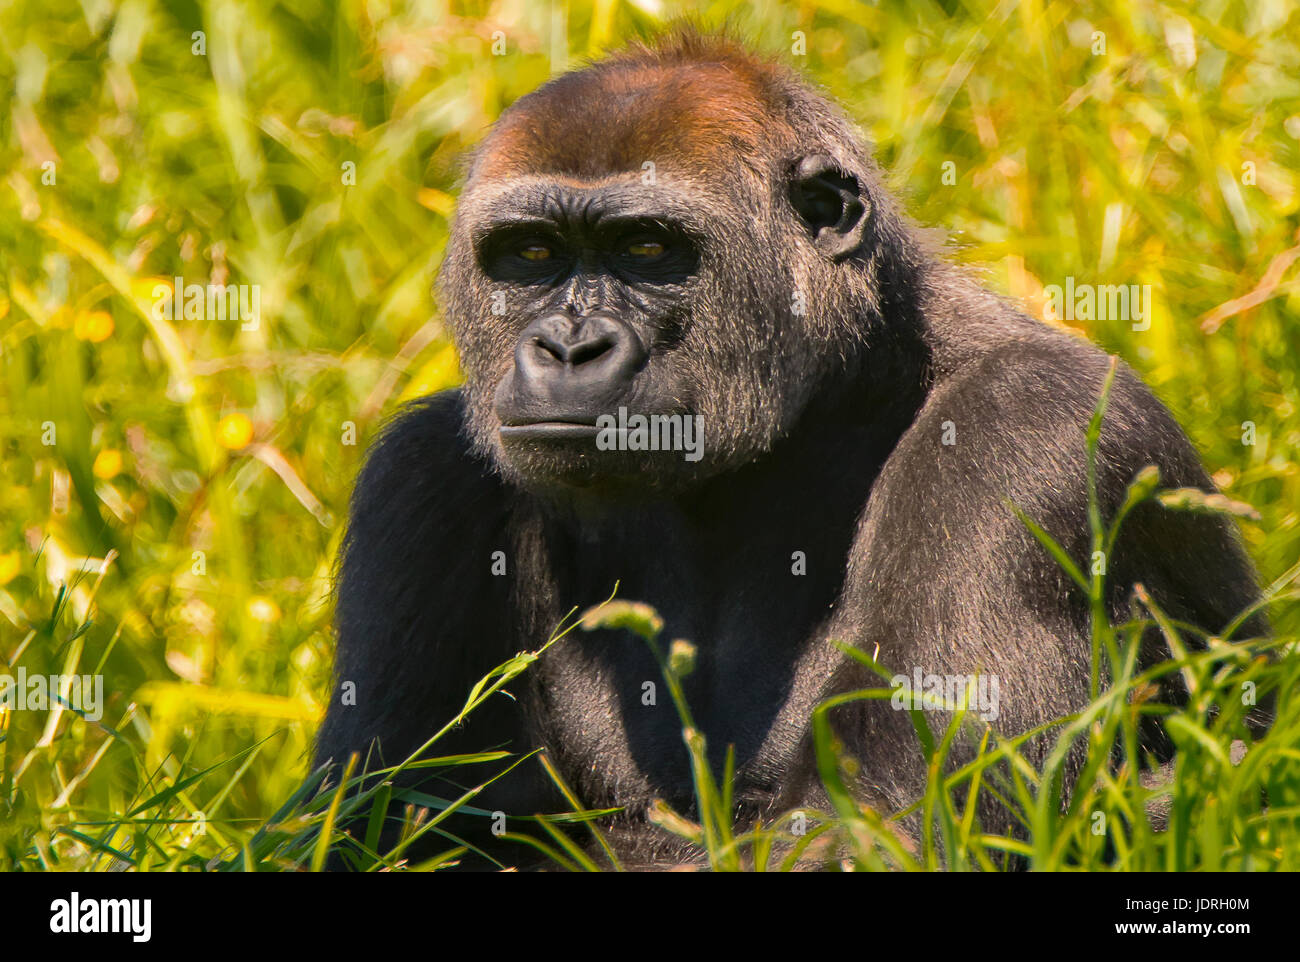 A Portrait of a Silverback Gorilla sitting in the Long Grass Stock Photo